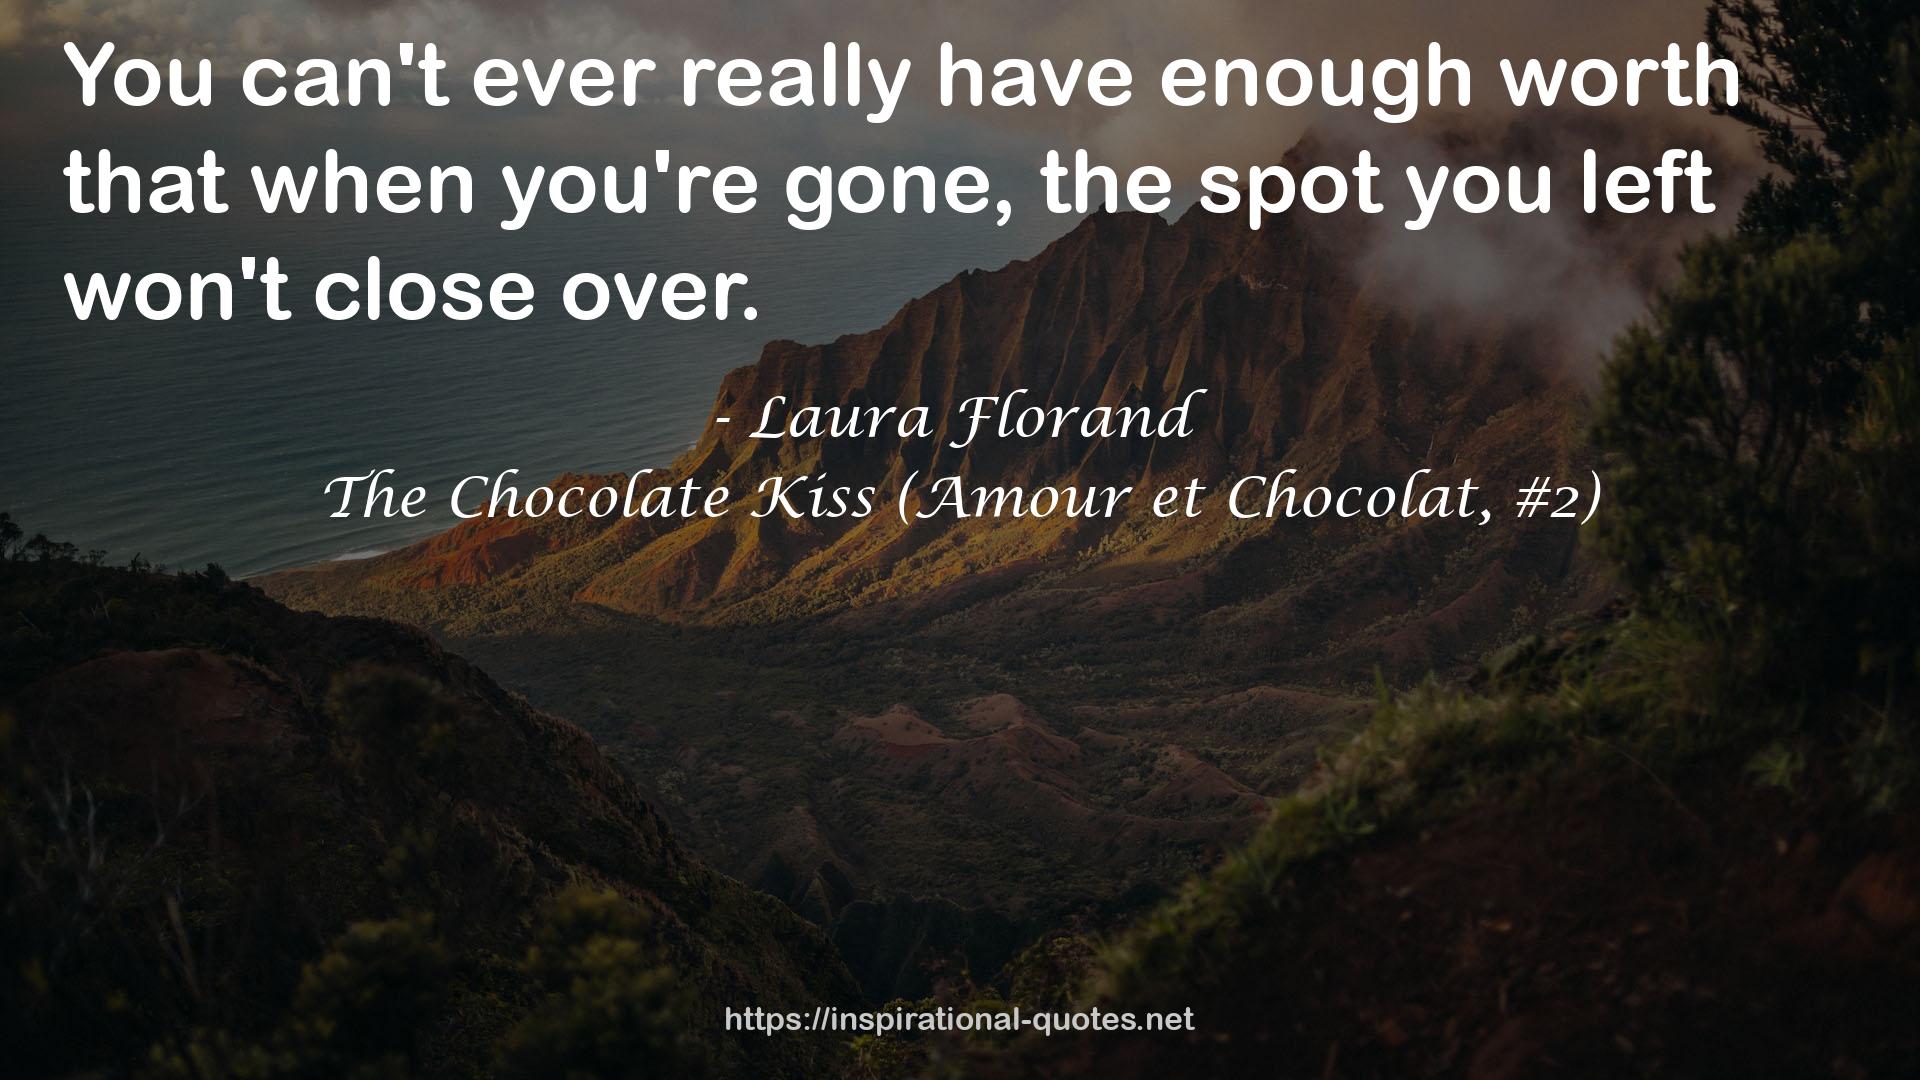 The Chocolate Kiss (Amour et Chocolat, #2) QUOTES